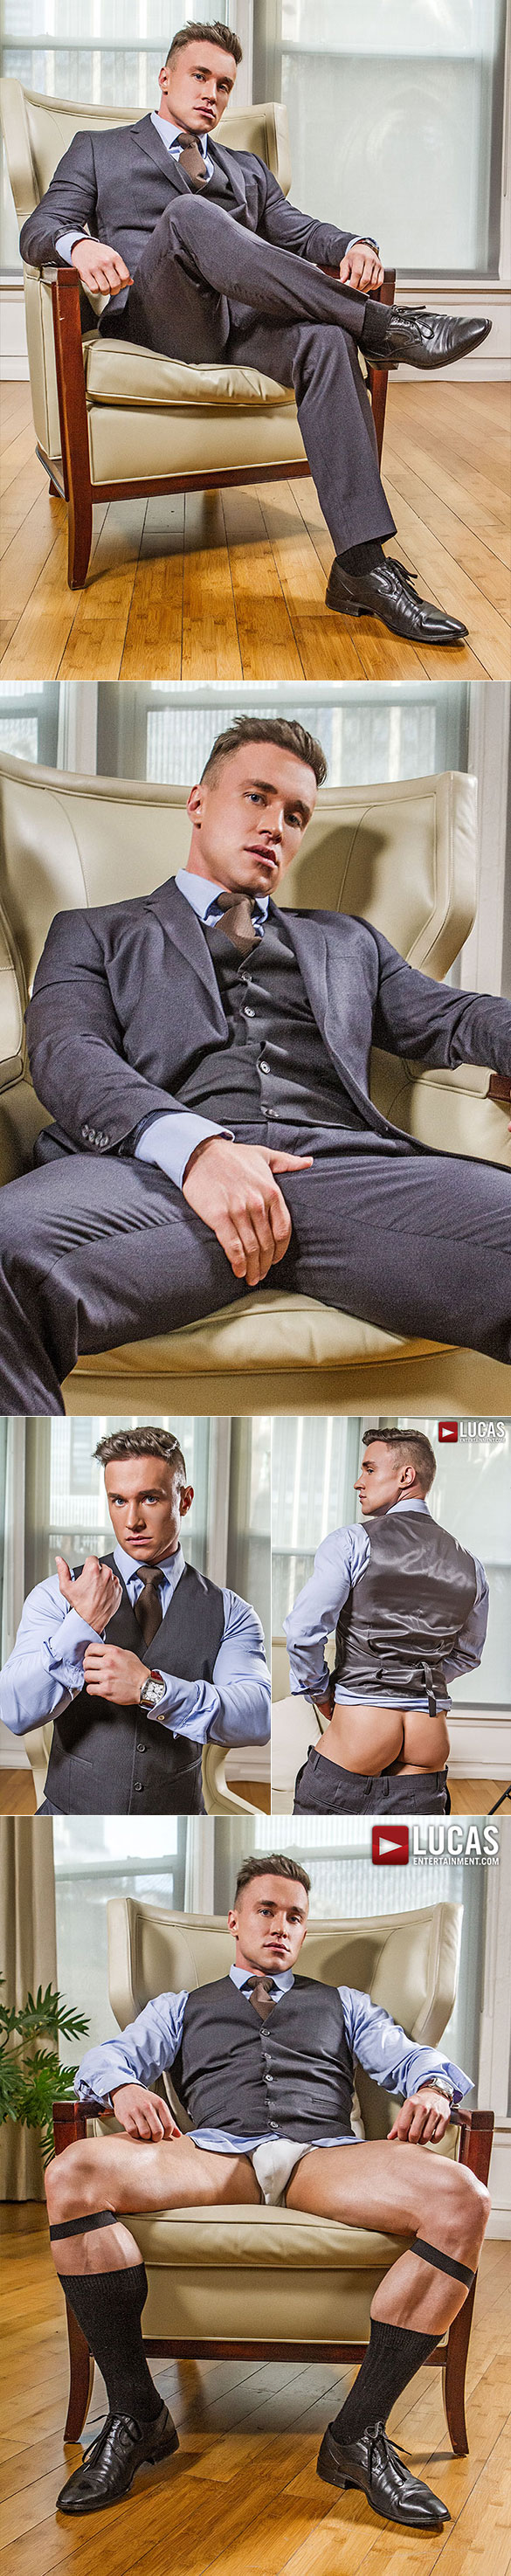 Lucas Entertainment: Alexander Volkov gets fucked raw by Sean Xavier and his 10-inch cock in "Gentlemen 17: Oral Office"